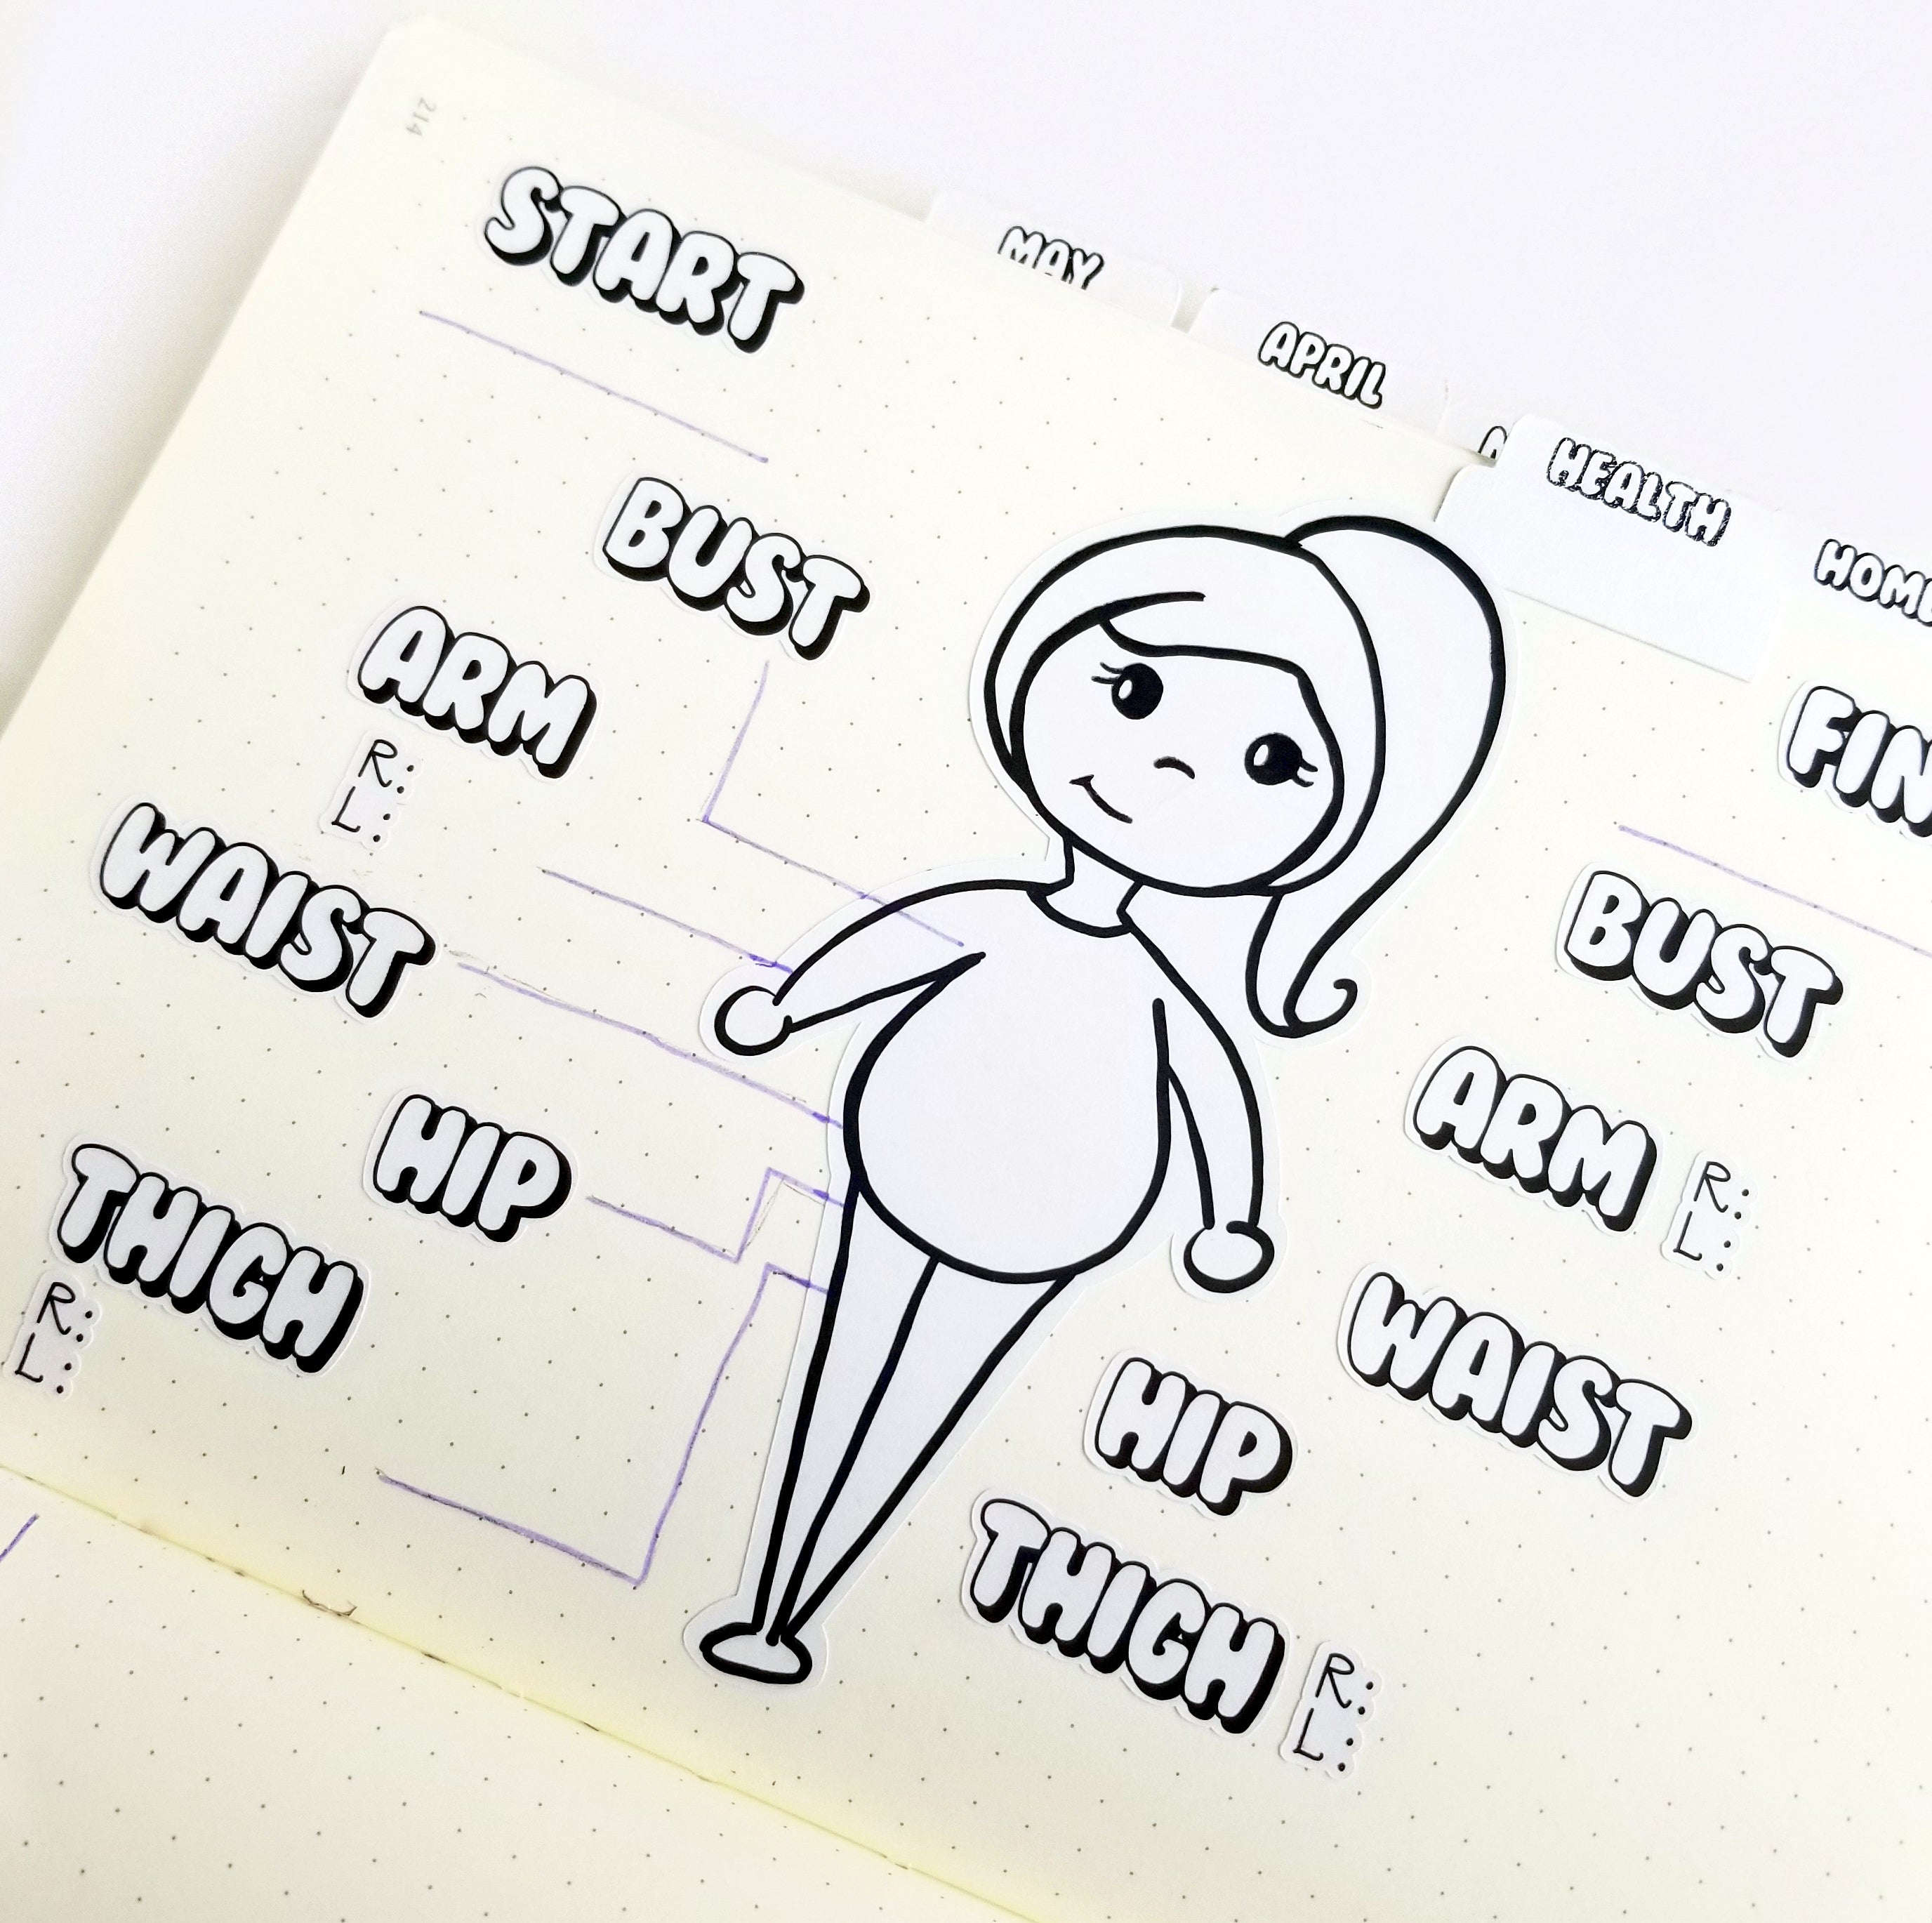 BODY MEASUREMENTS  Planner Stickers |  Hand Drawn